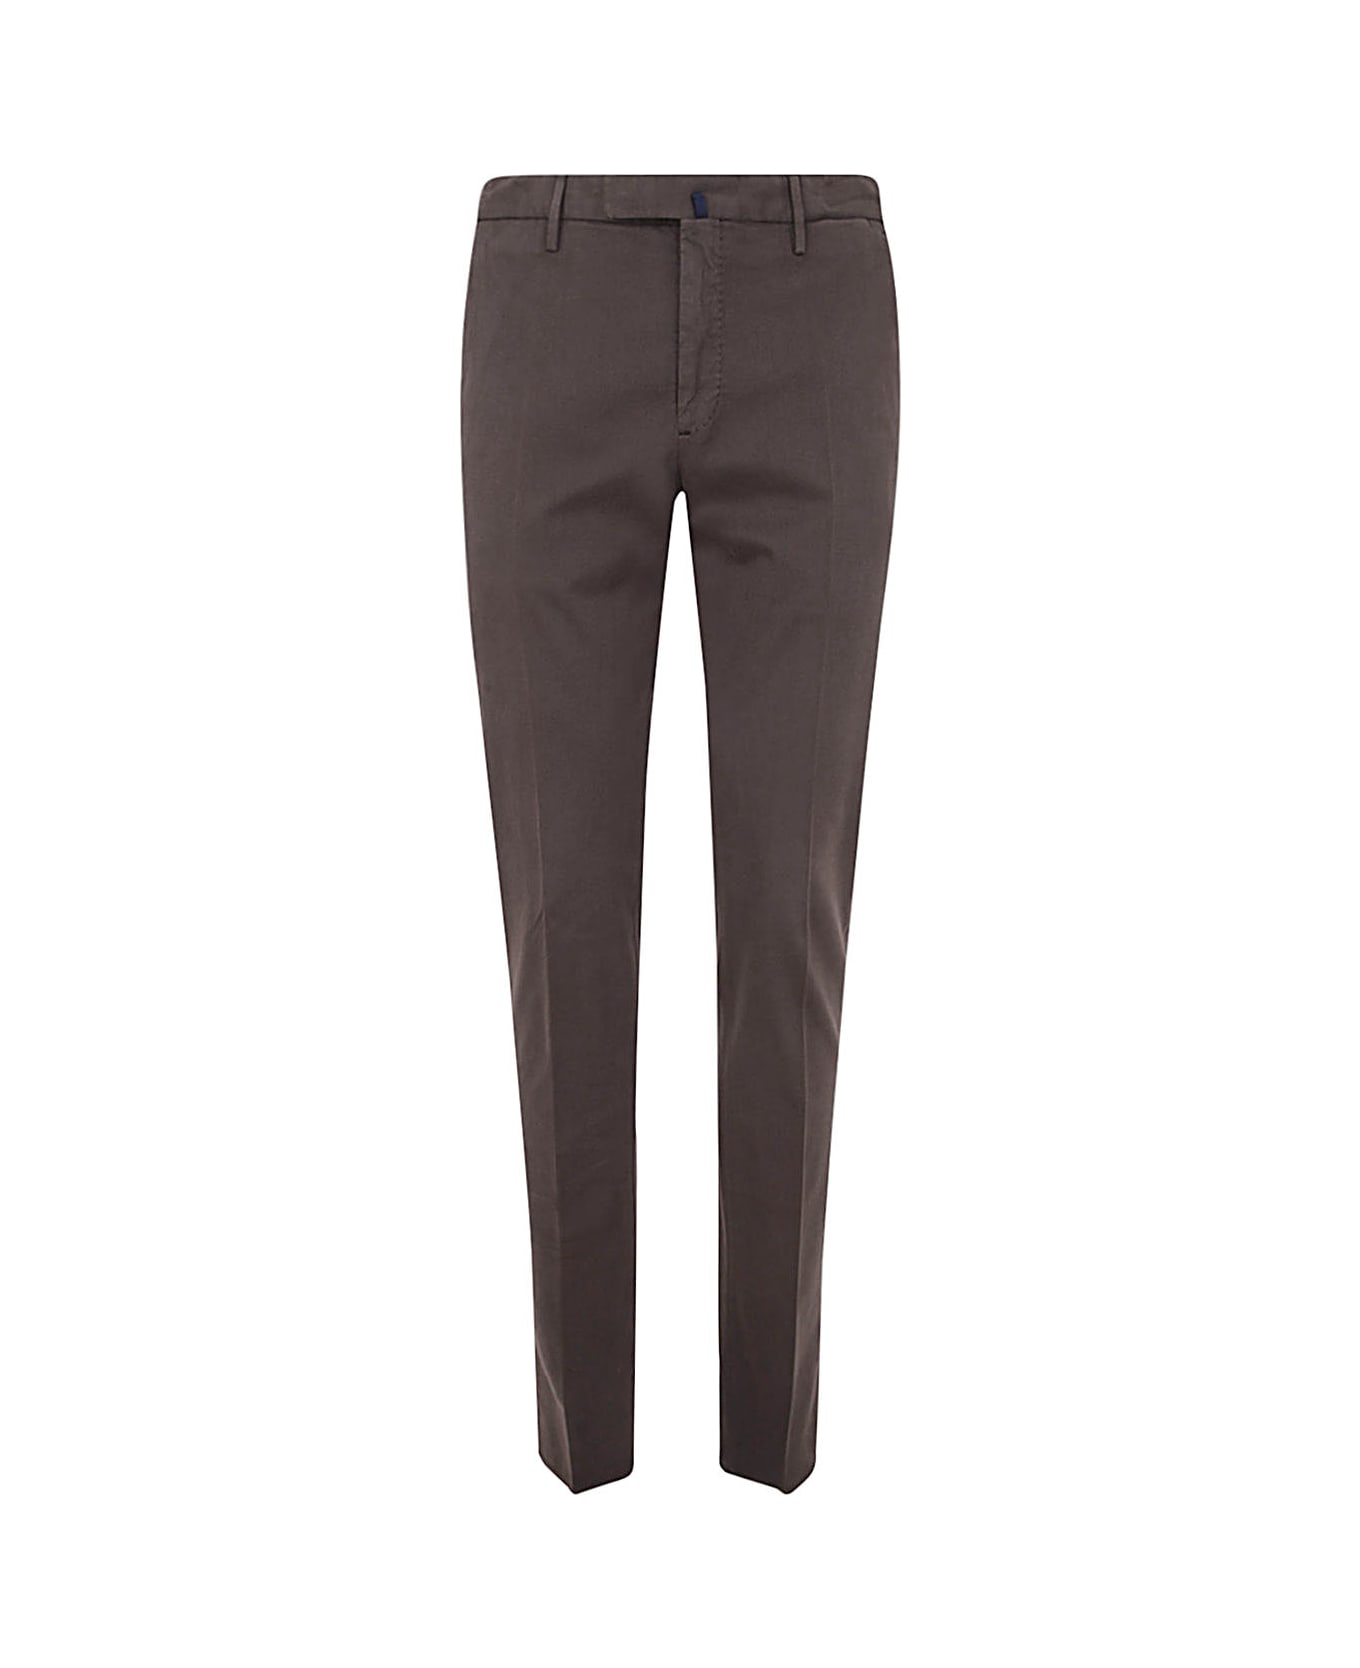 Incotex Cotton Classic Trousers - Brown